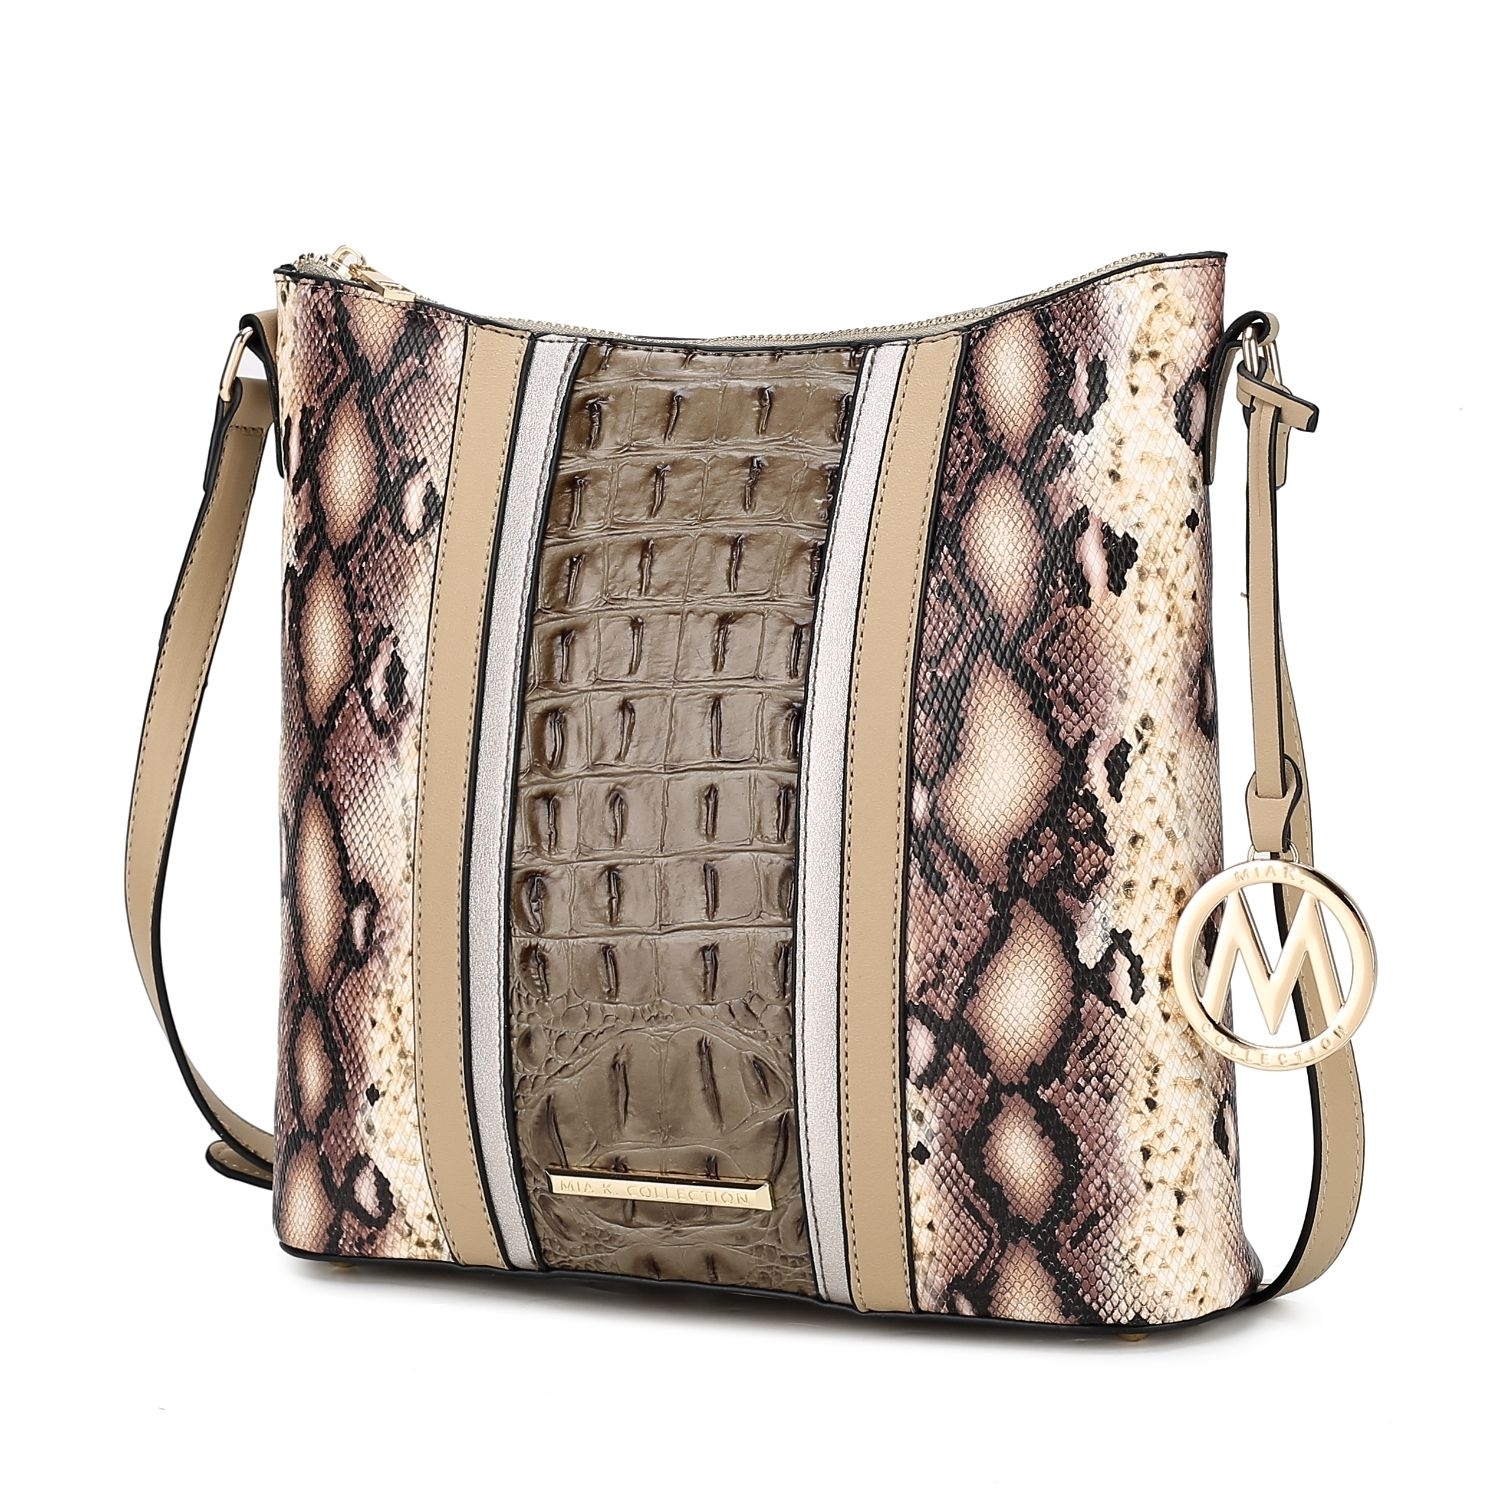 MKF Collection Meline Faux Crocodile And Snake Embossed Vegan Leather Women's Shoulder Bag By Mia K - Beige